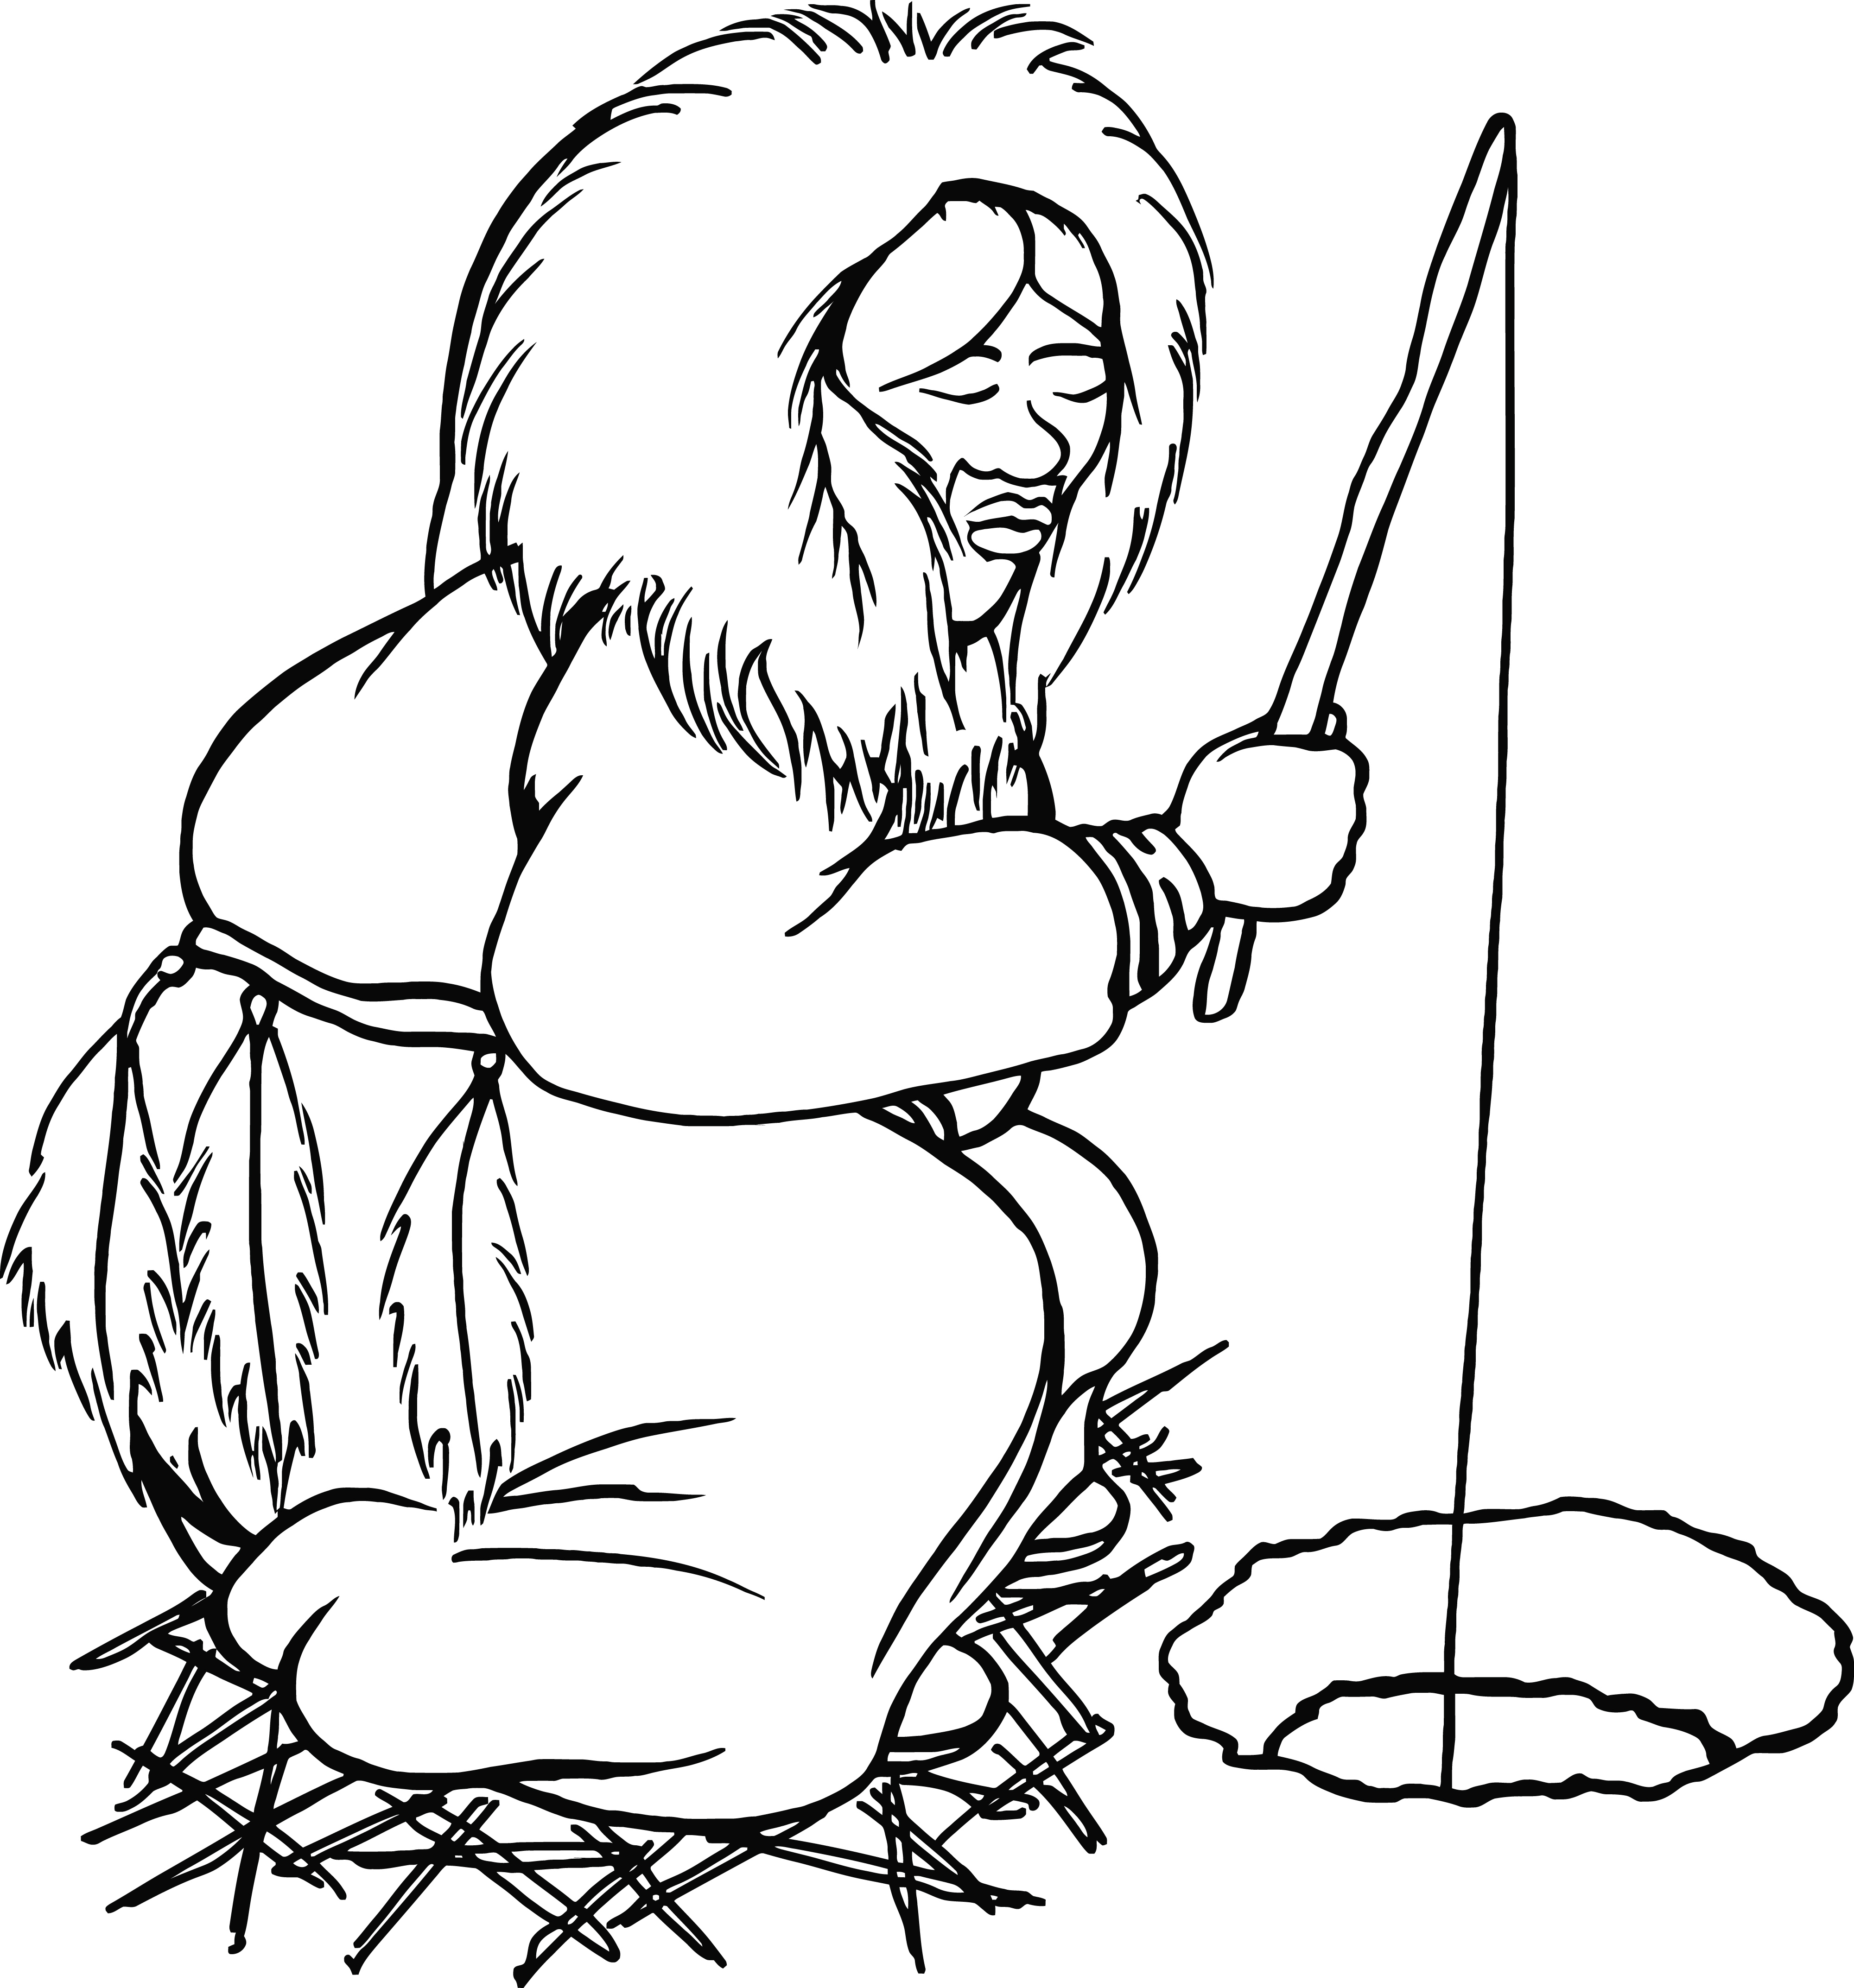 Free Clipart Of An ice fishing eskimo.